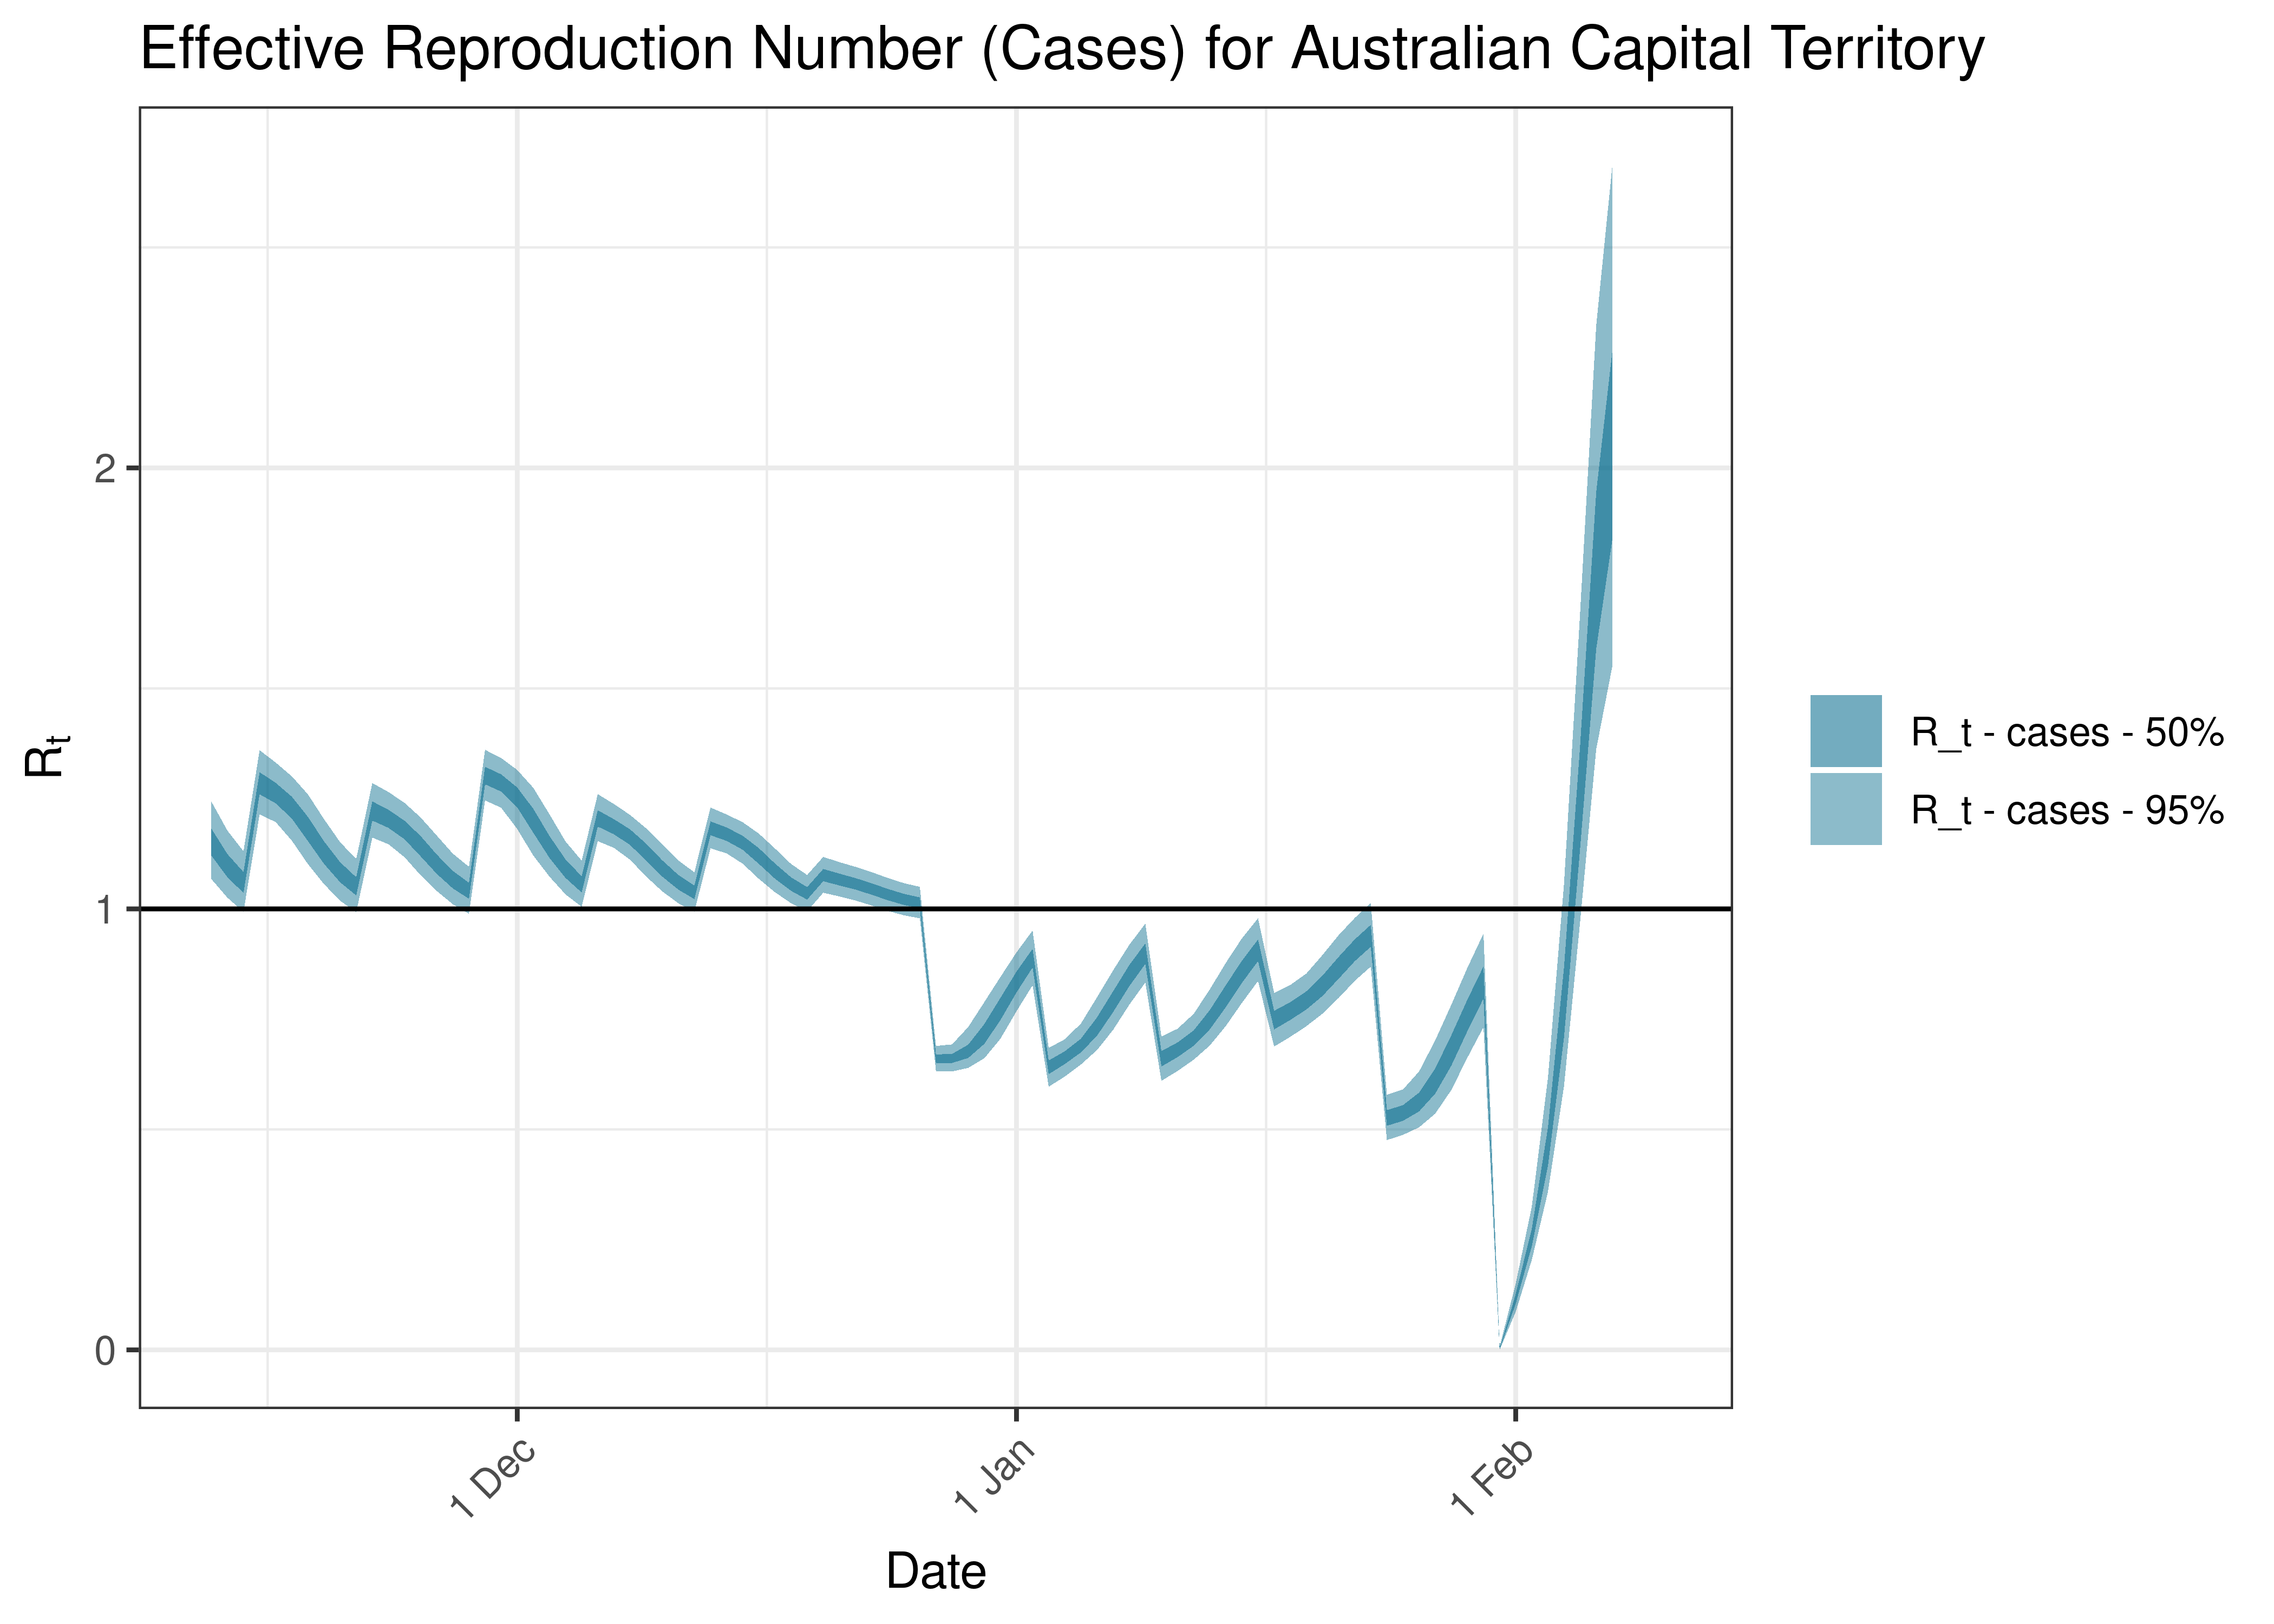 Estimated Effective Reproduction Number Based on Cases for Australian Capital Territory over last 90 days